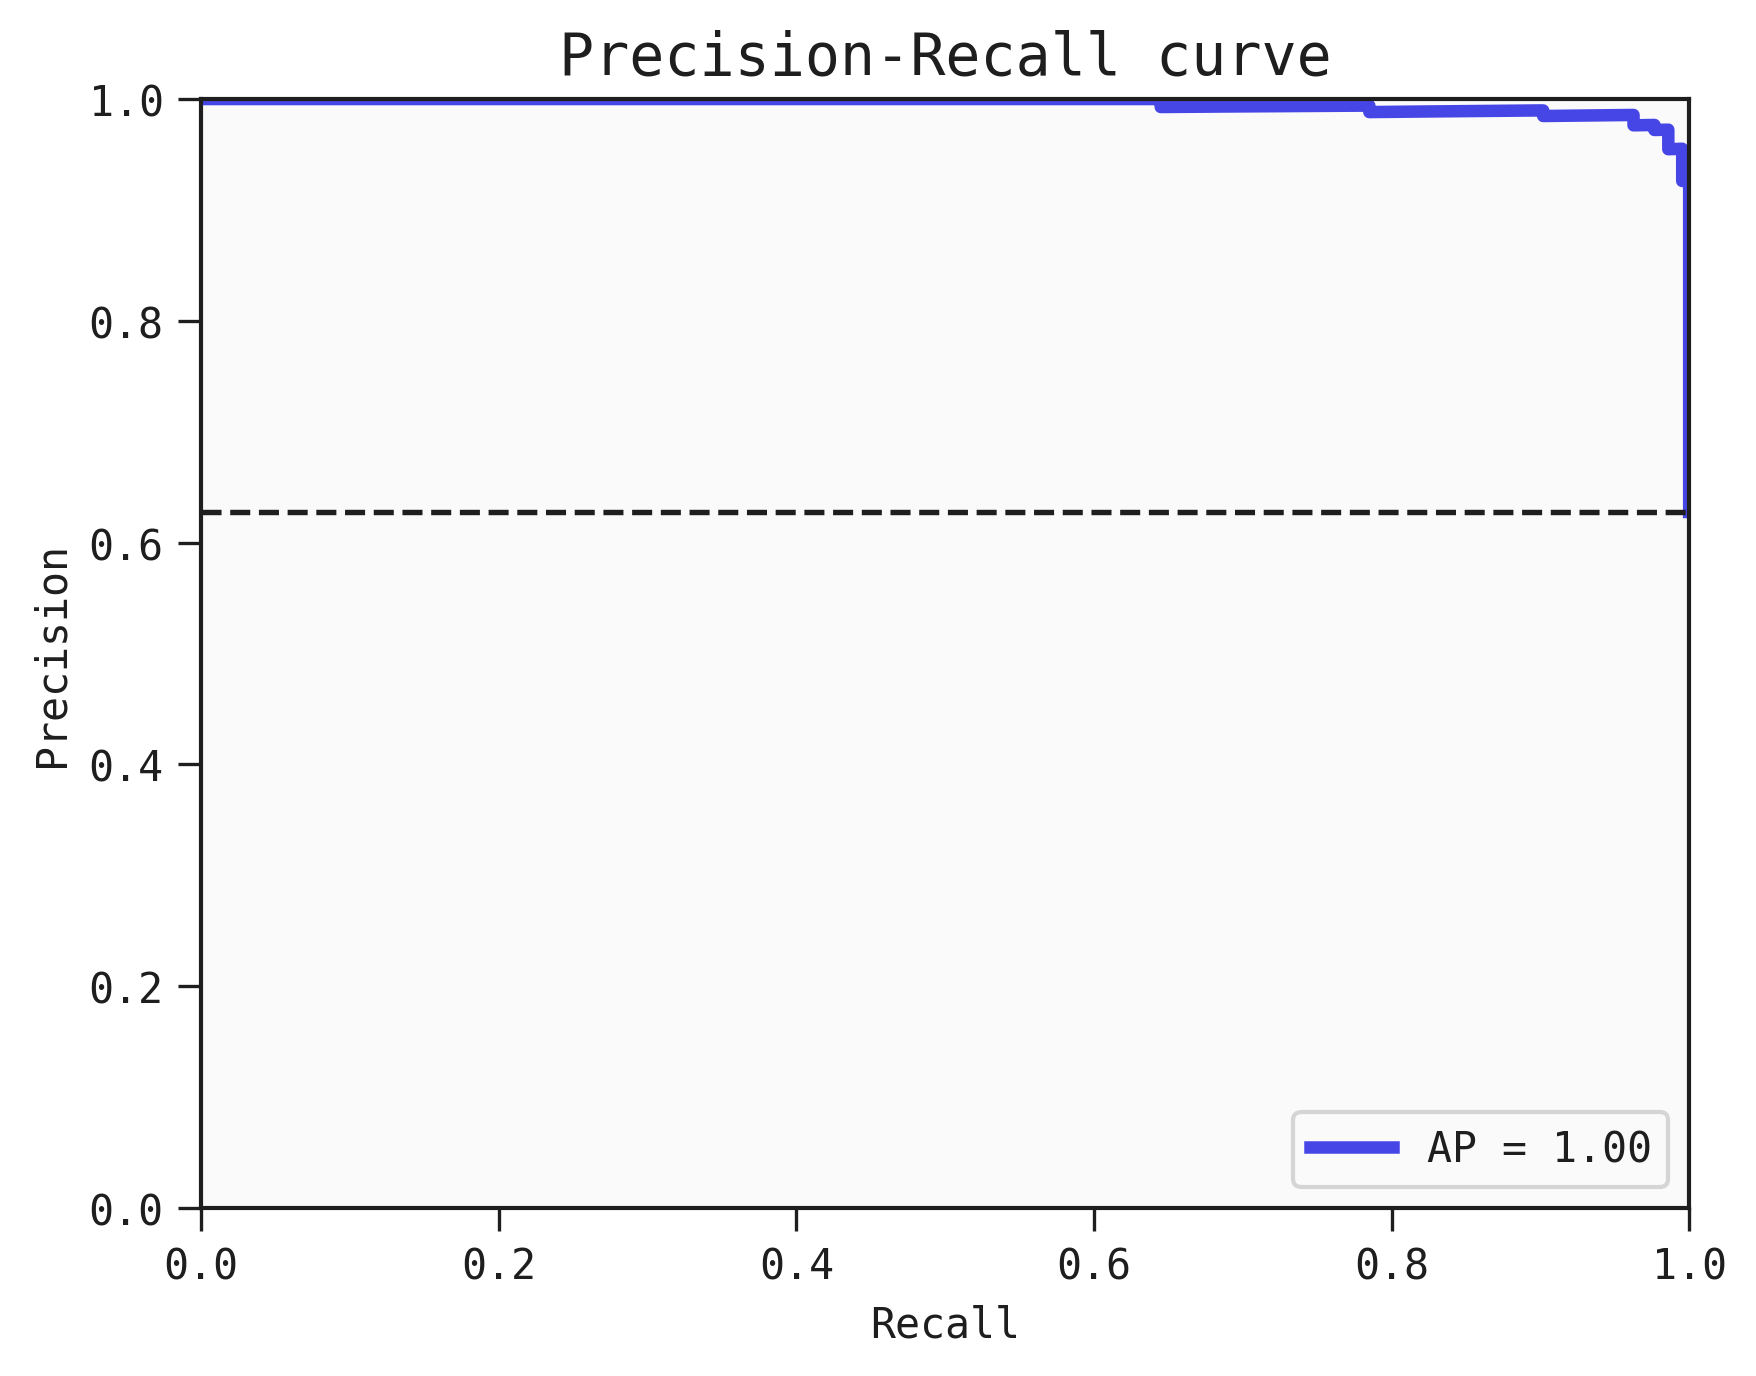 Plot showing the Precision-Recall curve